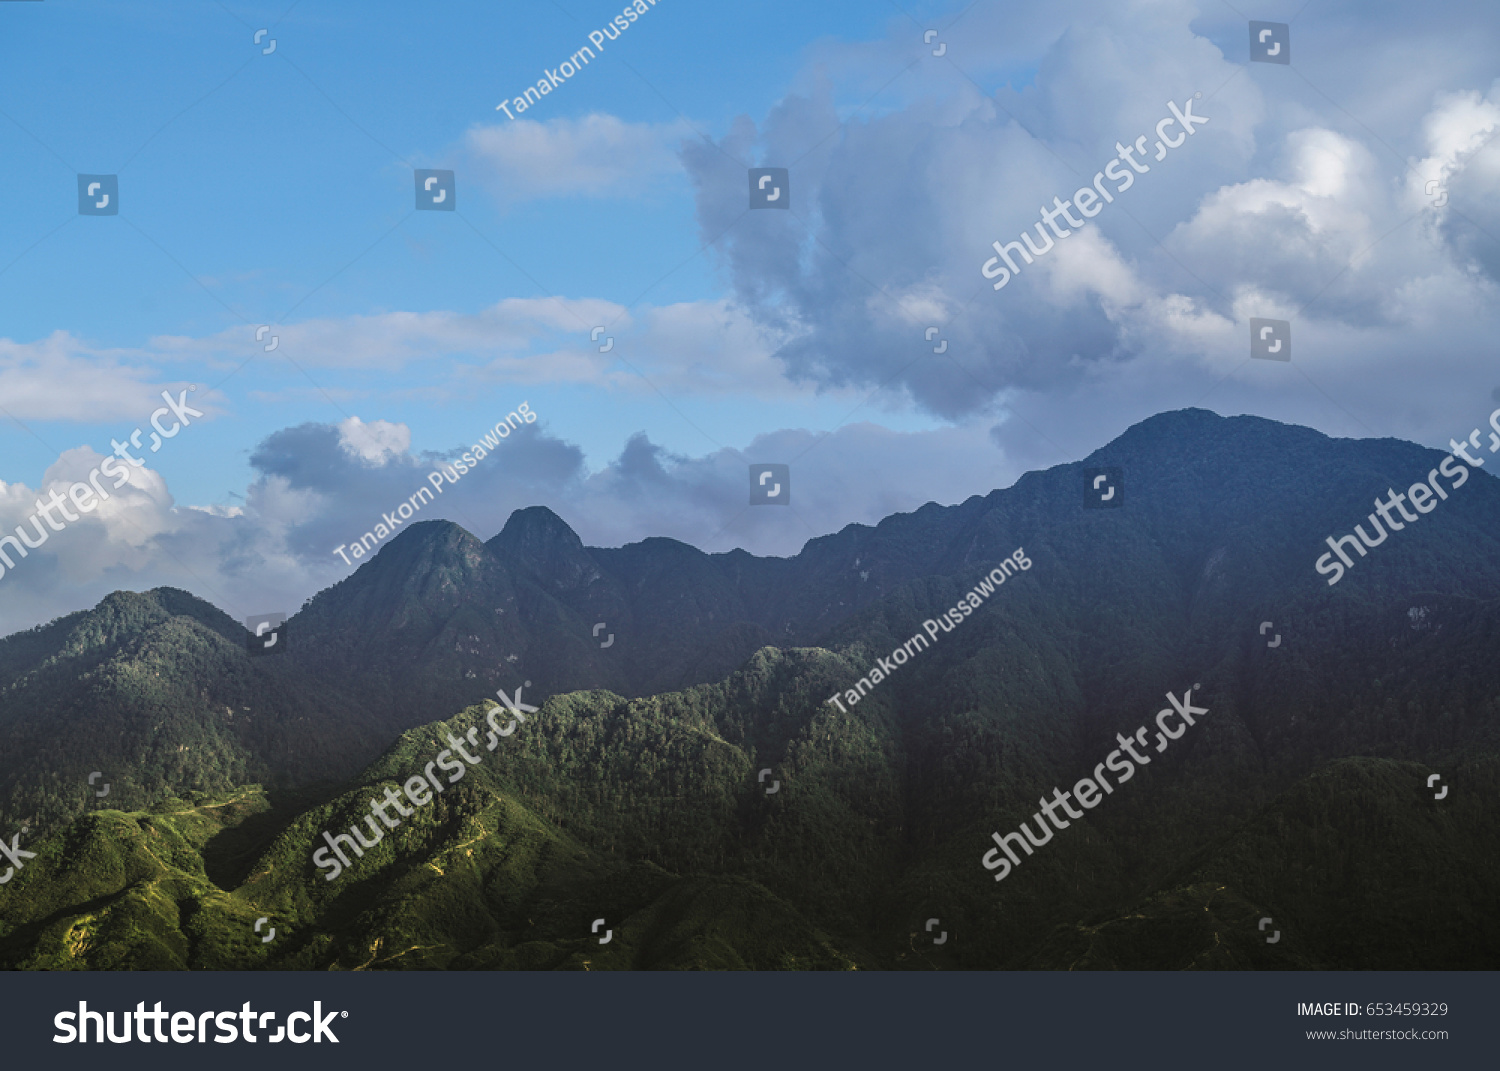  Vietnam Sapa, Tropical forest and mountain in the mist in Sapa , Vietnam. #653459329